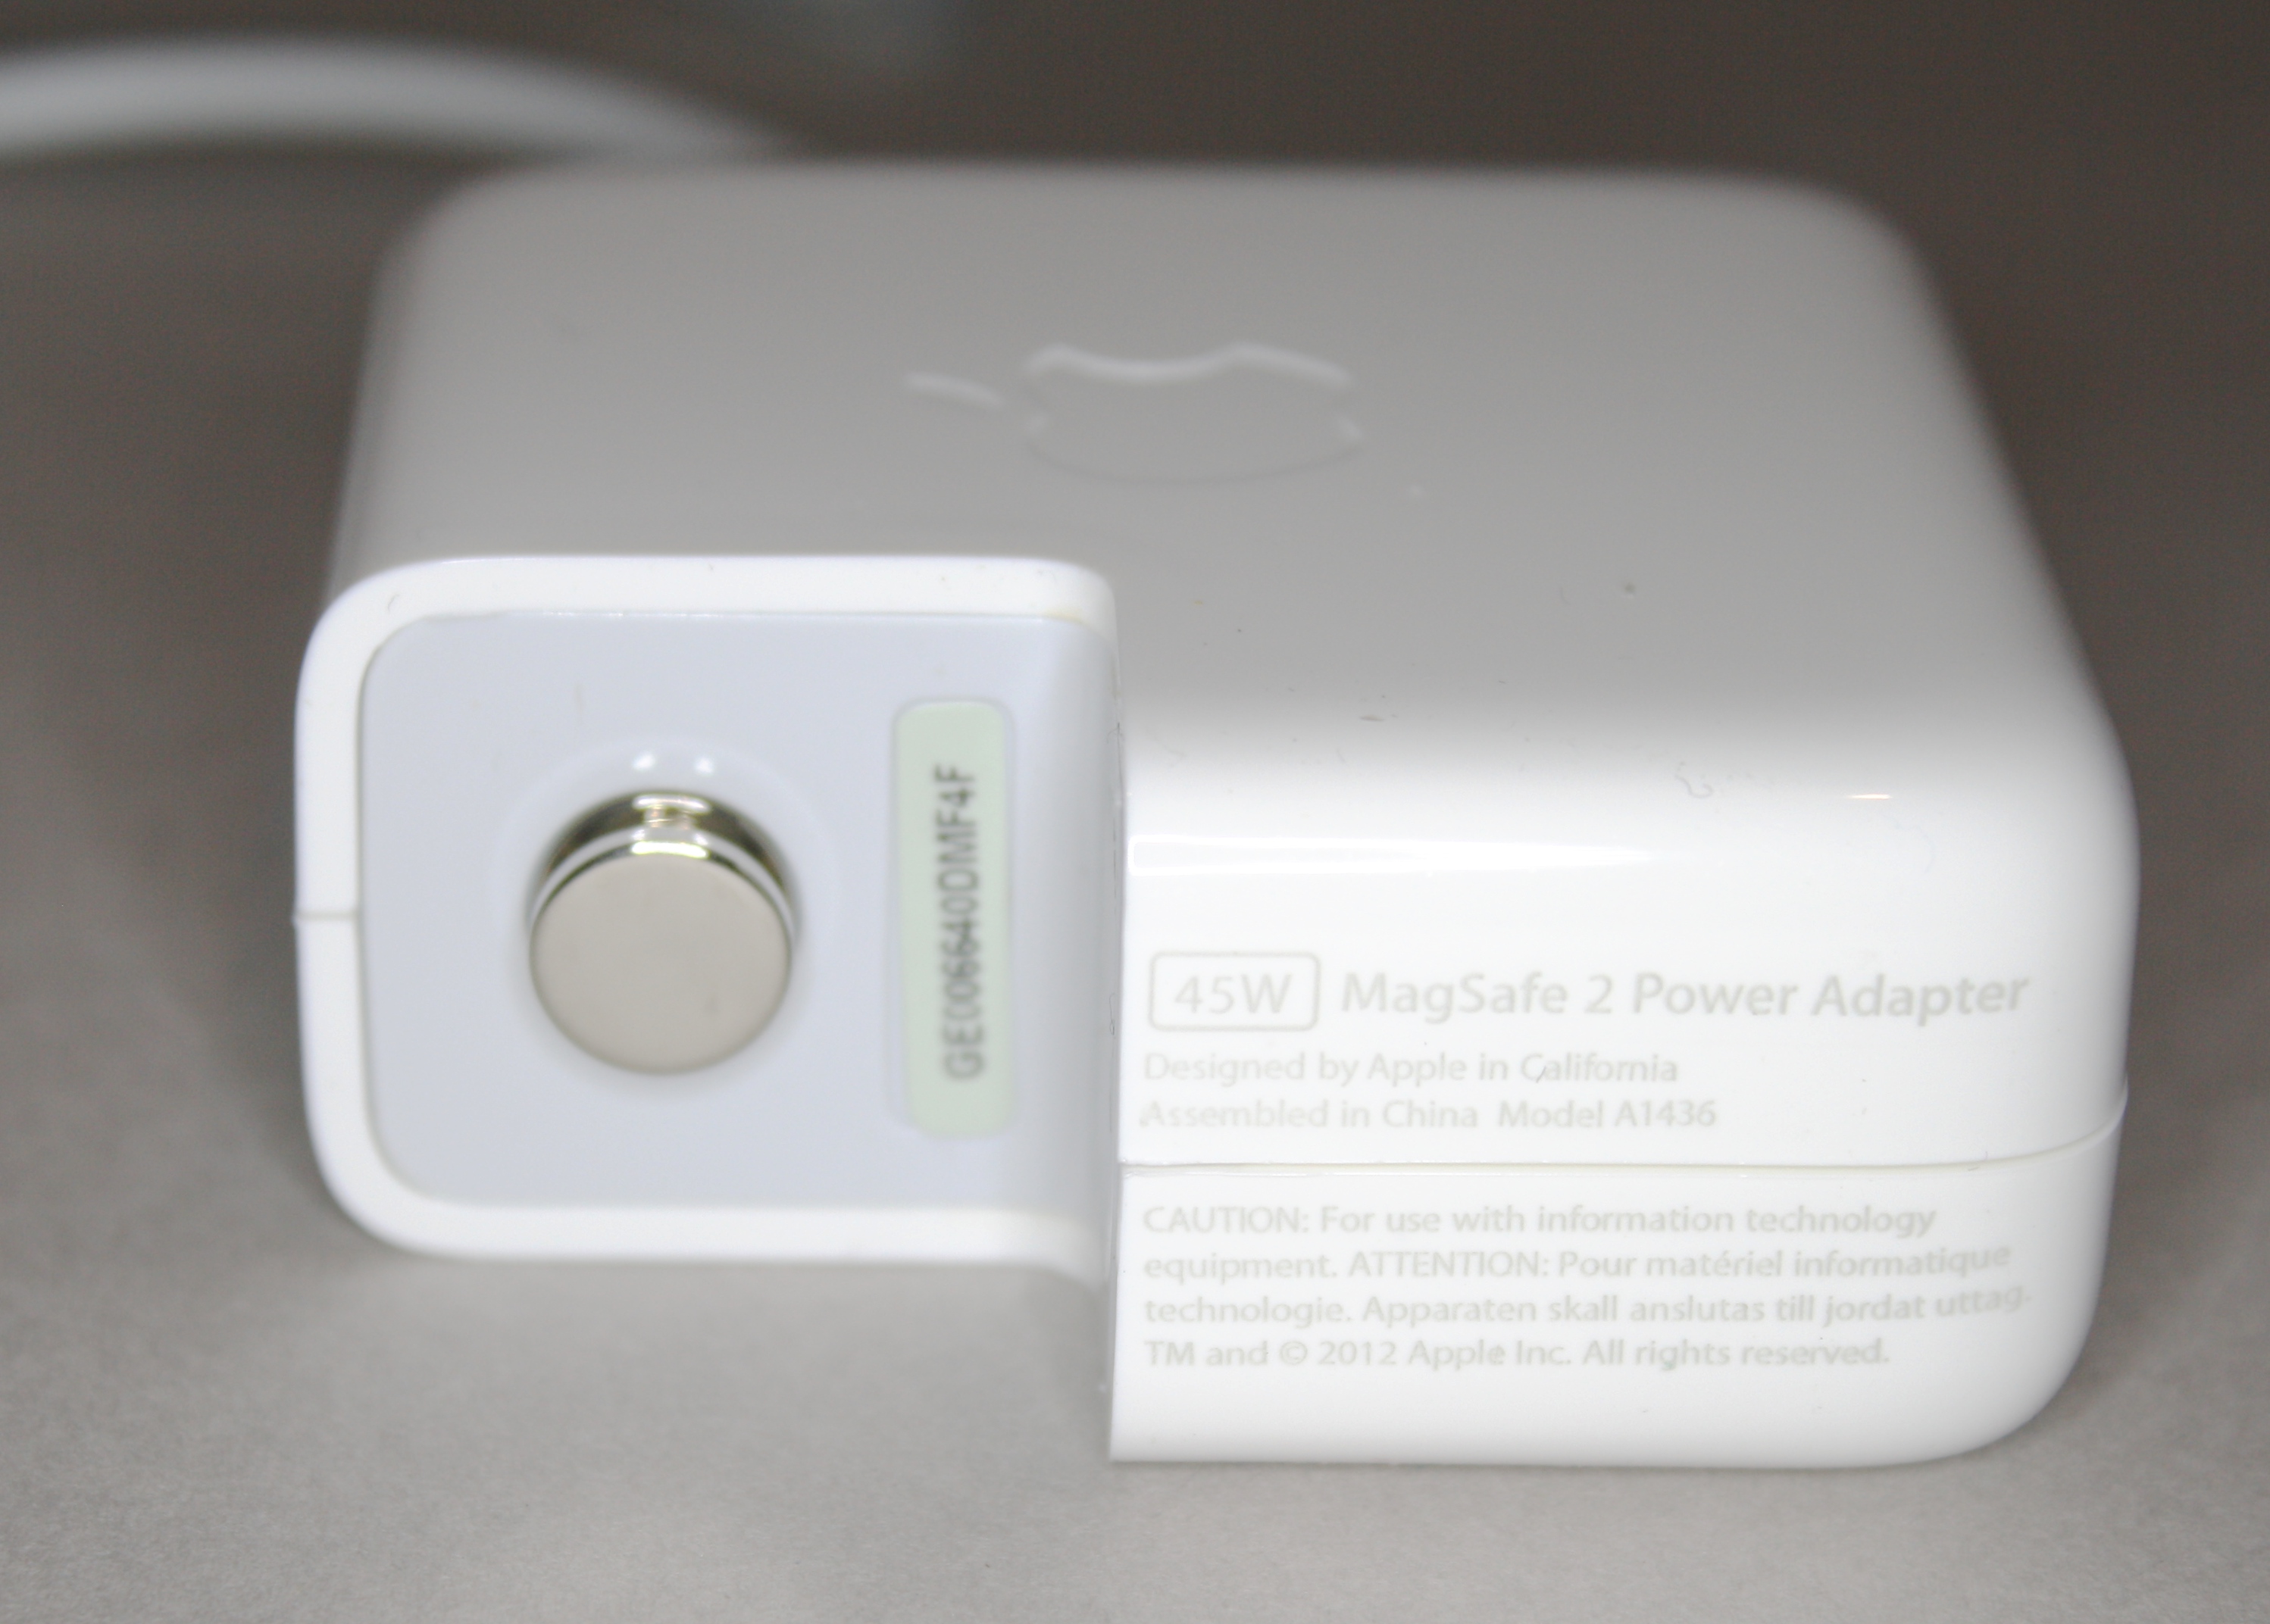 counterfeit apple macbook air charger